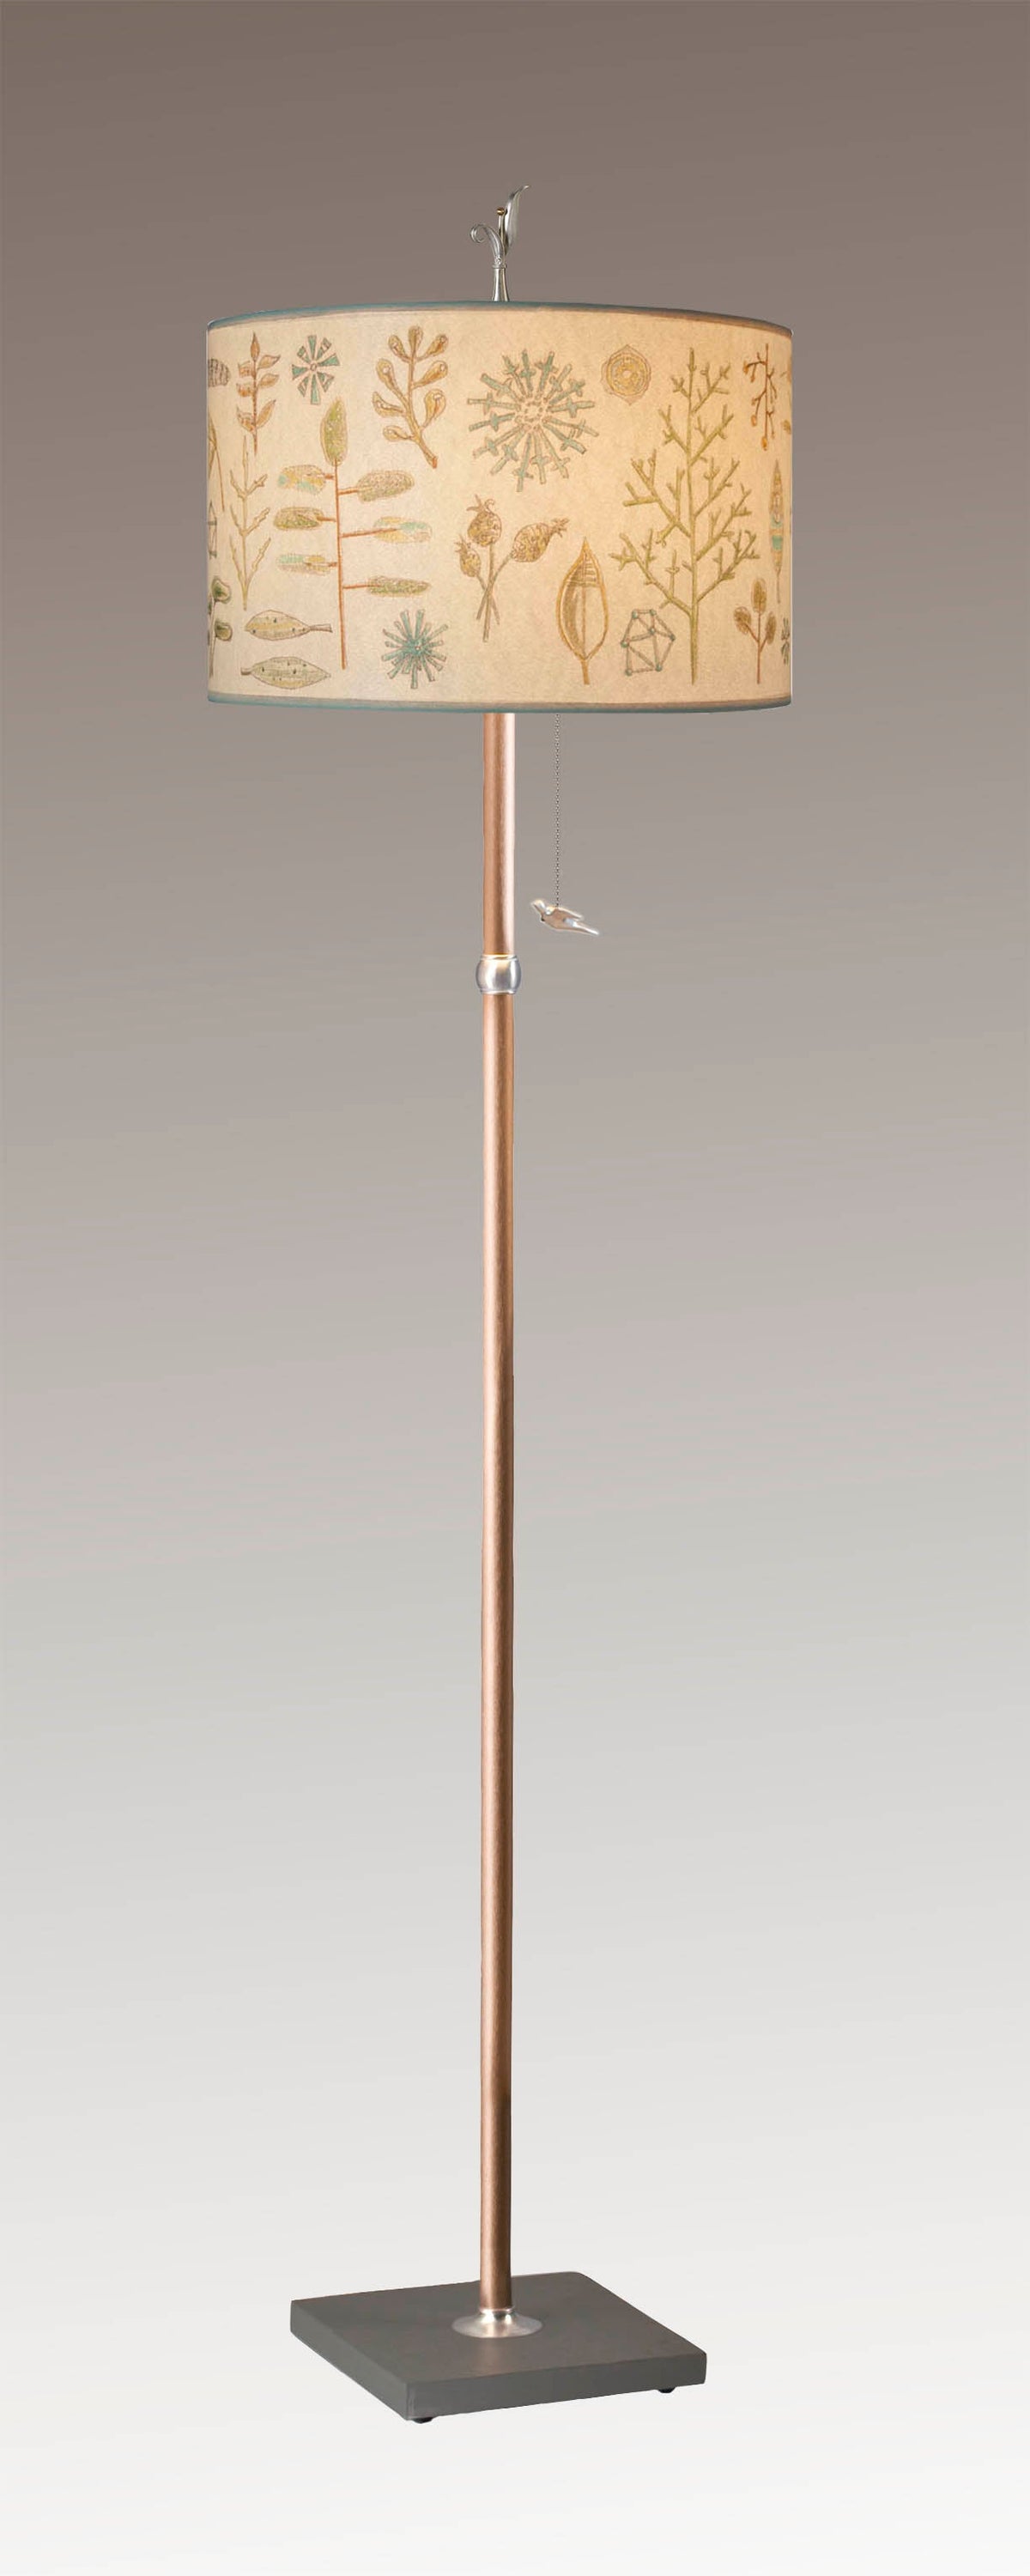 Copper Floor Lamp with Large Drum Shade in Field Chart